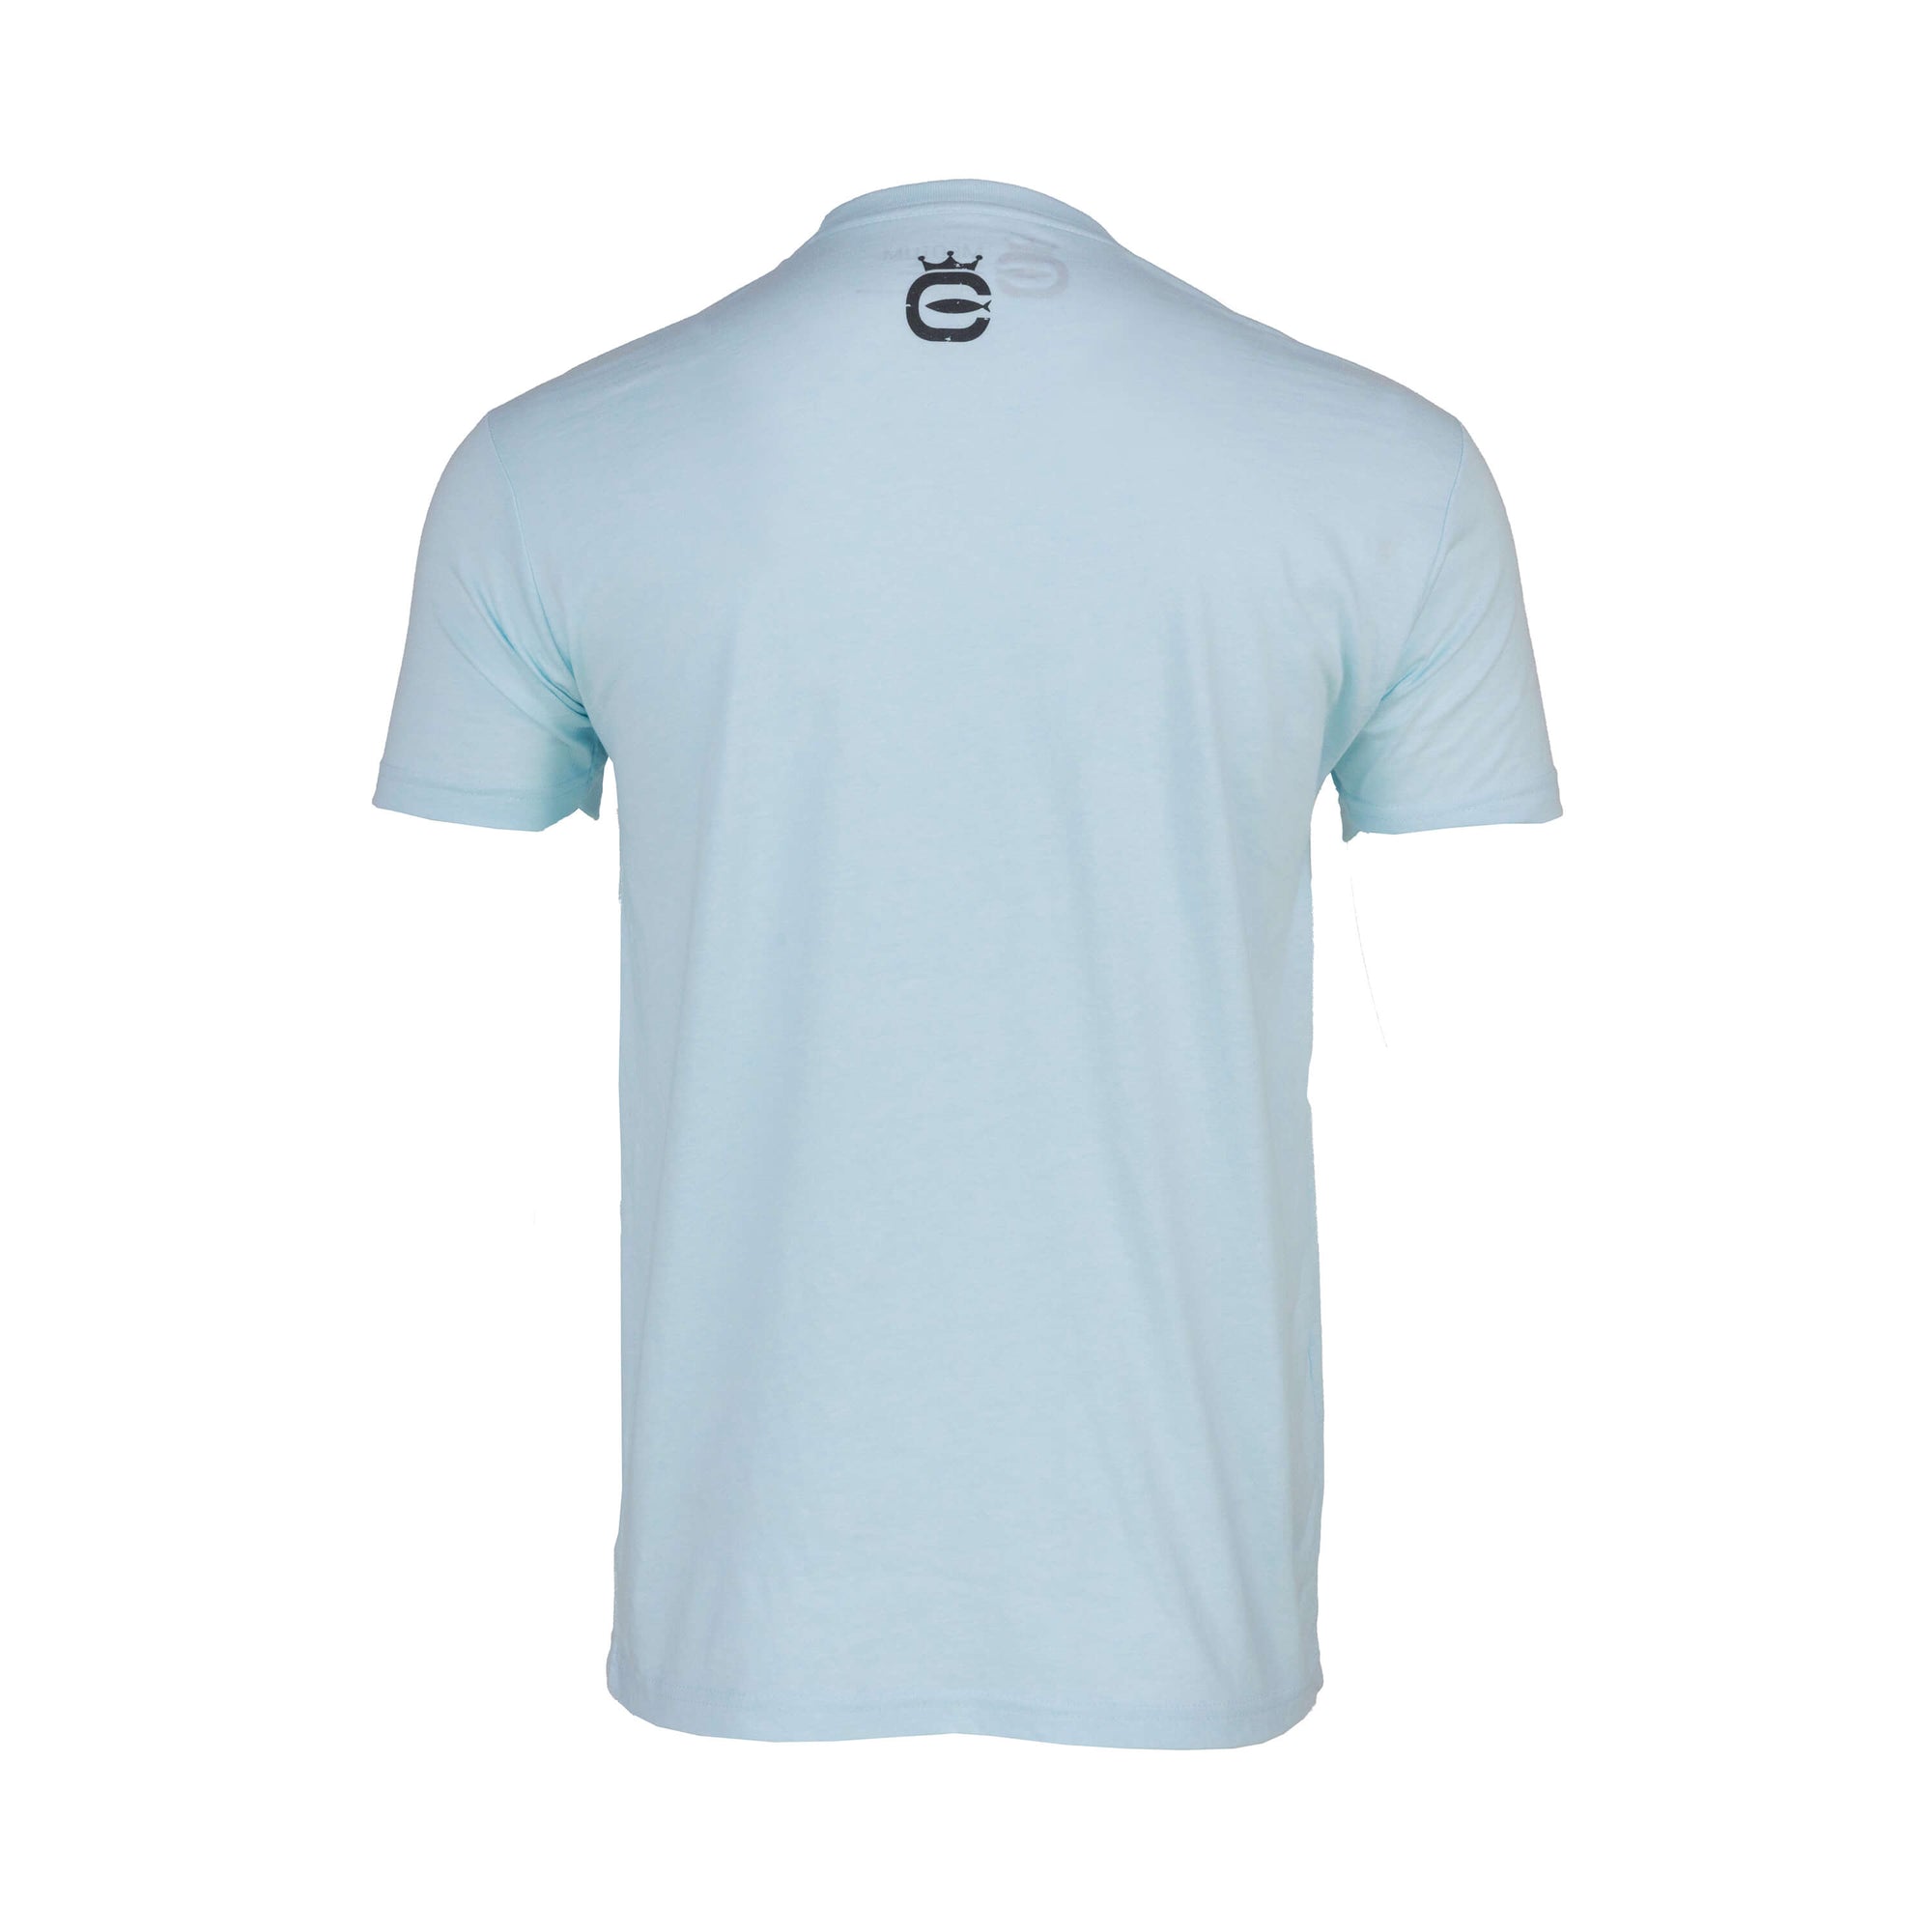 Back view of the Cortland Topographic Logo T-Shirt